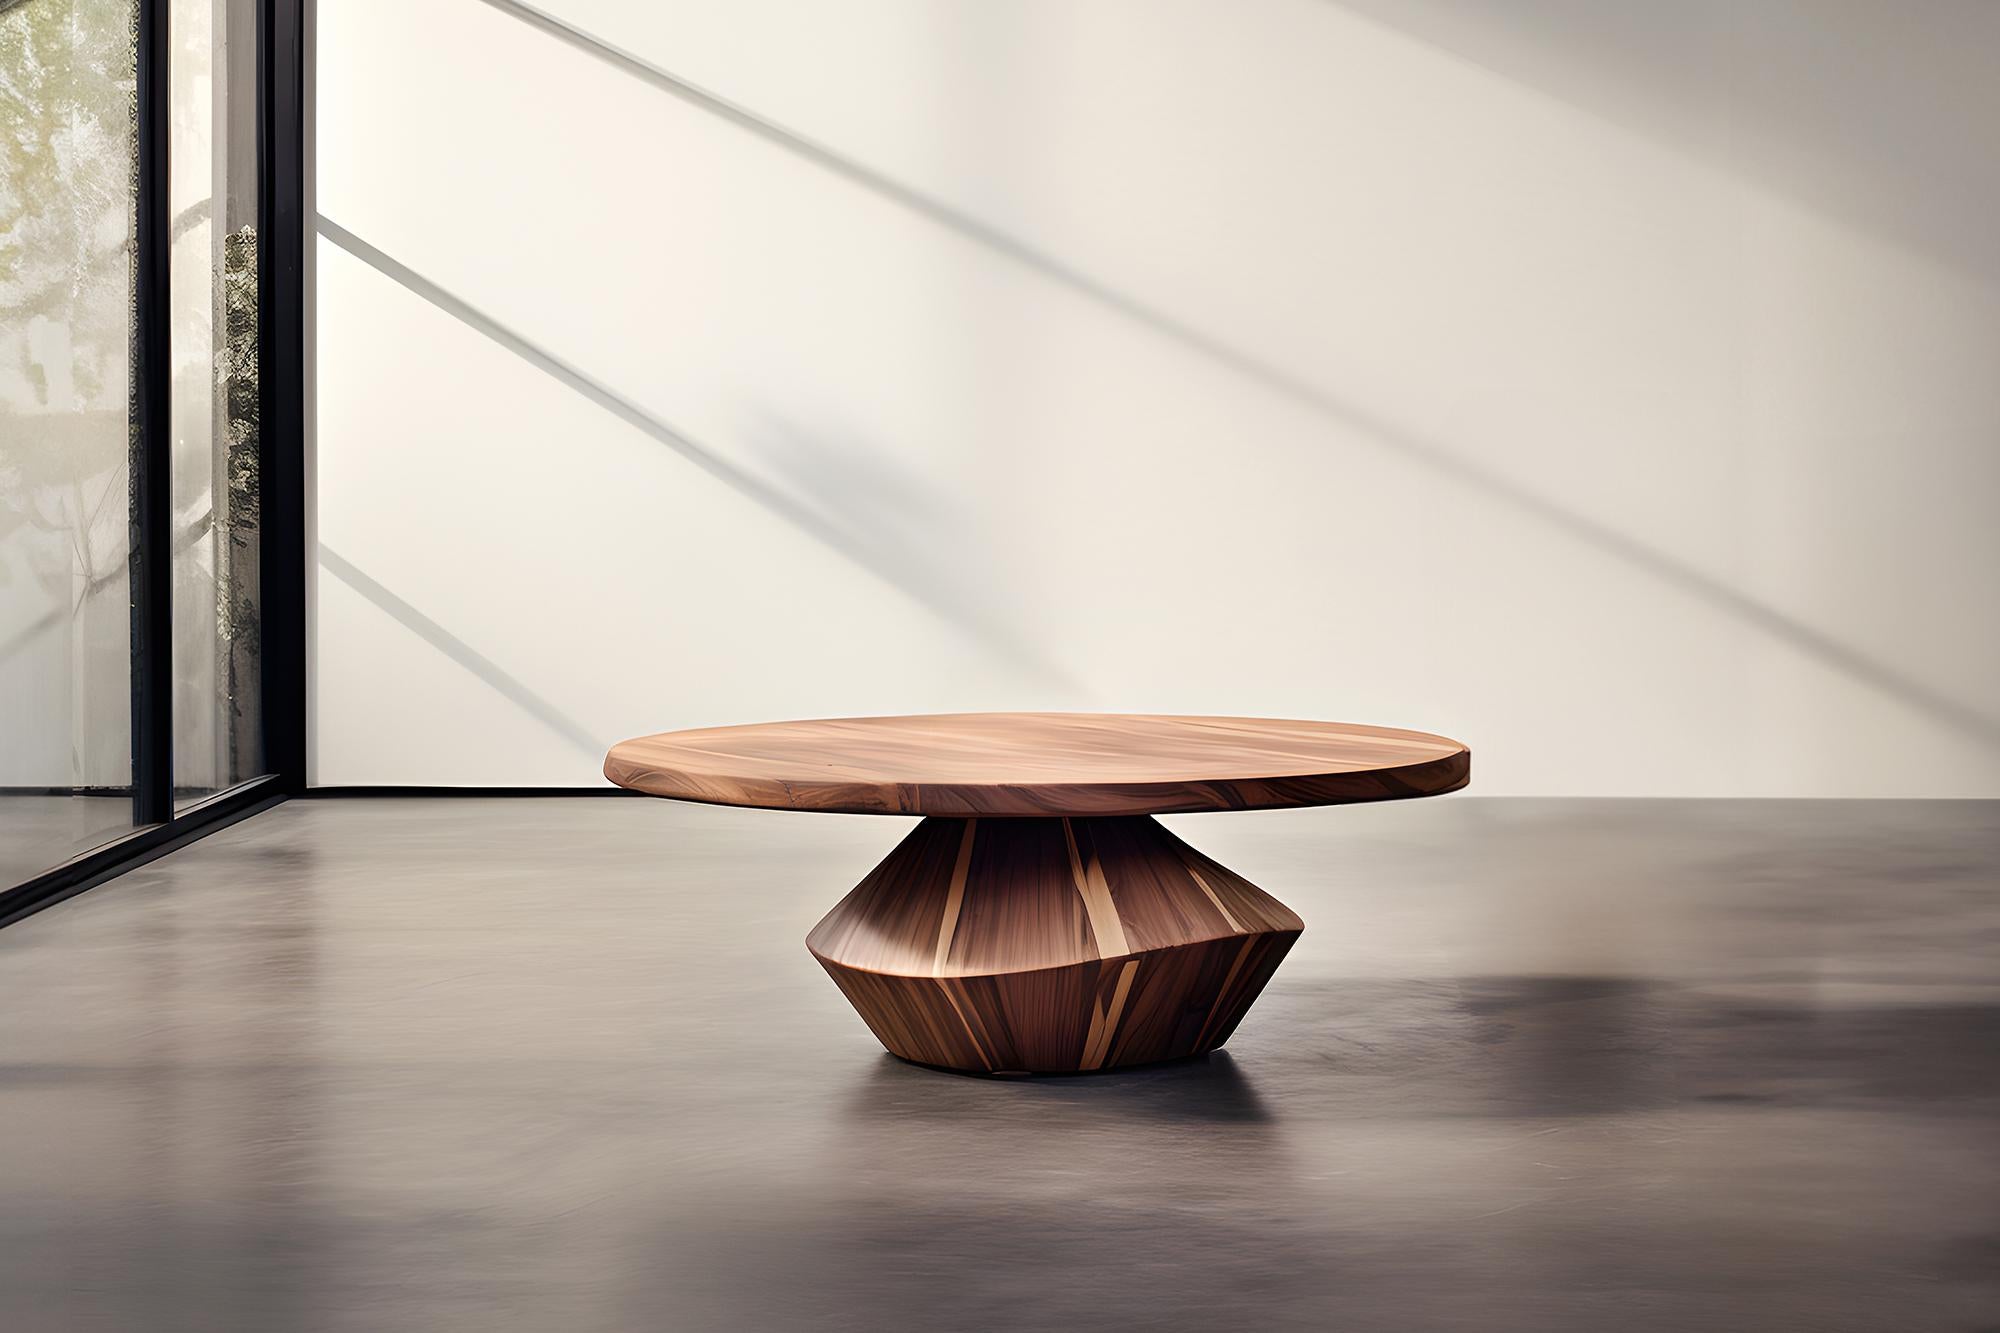 Sculptural Coffee Table Made of Solid Wood, Center Table Solace S43 by Joel Escalona


The Solace table series, designed by Joel Escalona, is a furniture collection that exudes balance and presence, thanks to its sensuous, dense, and irregular